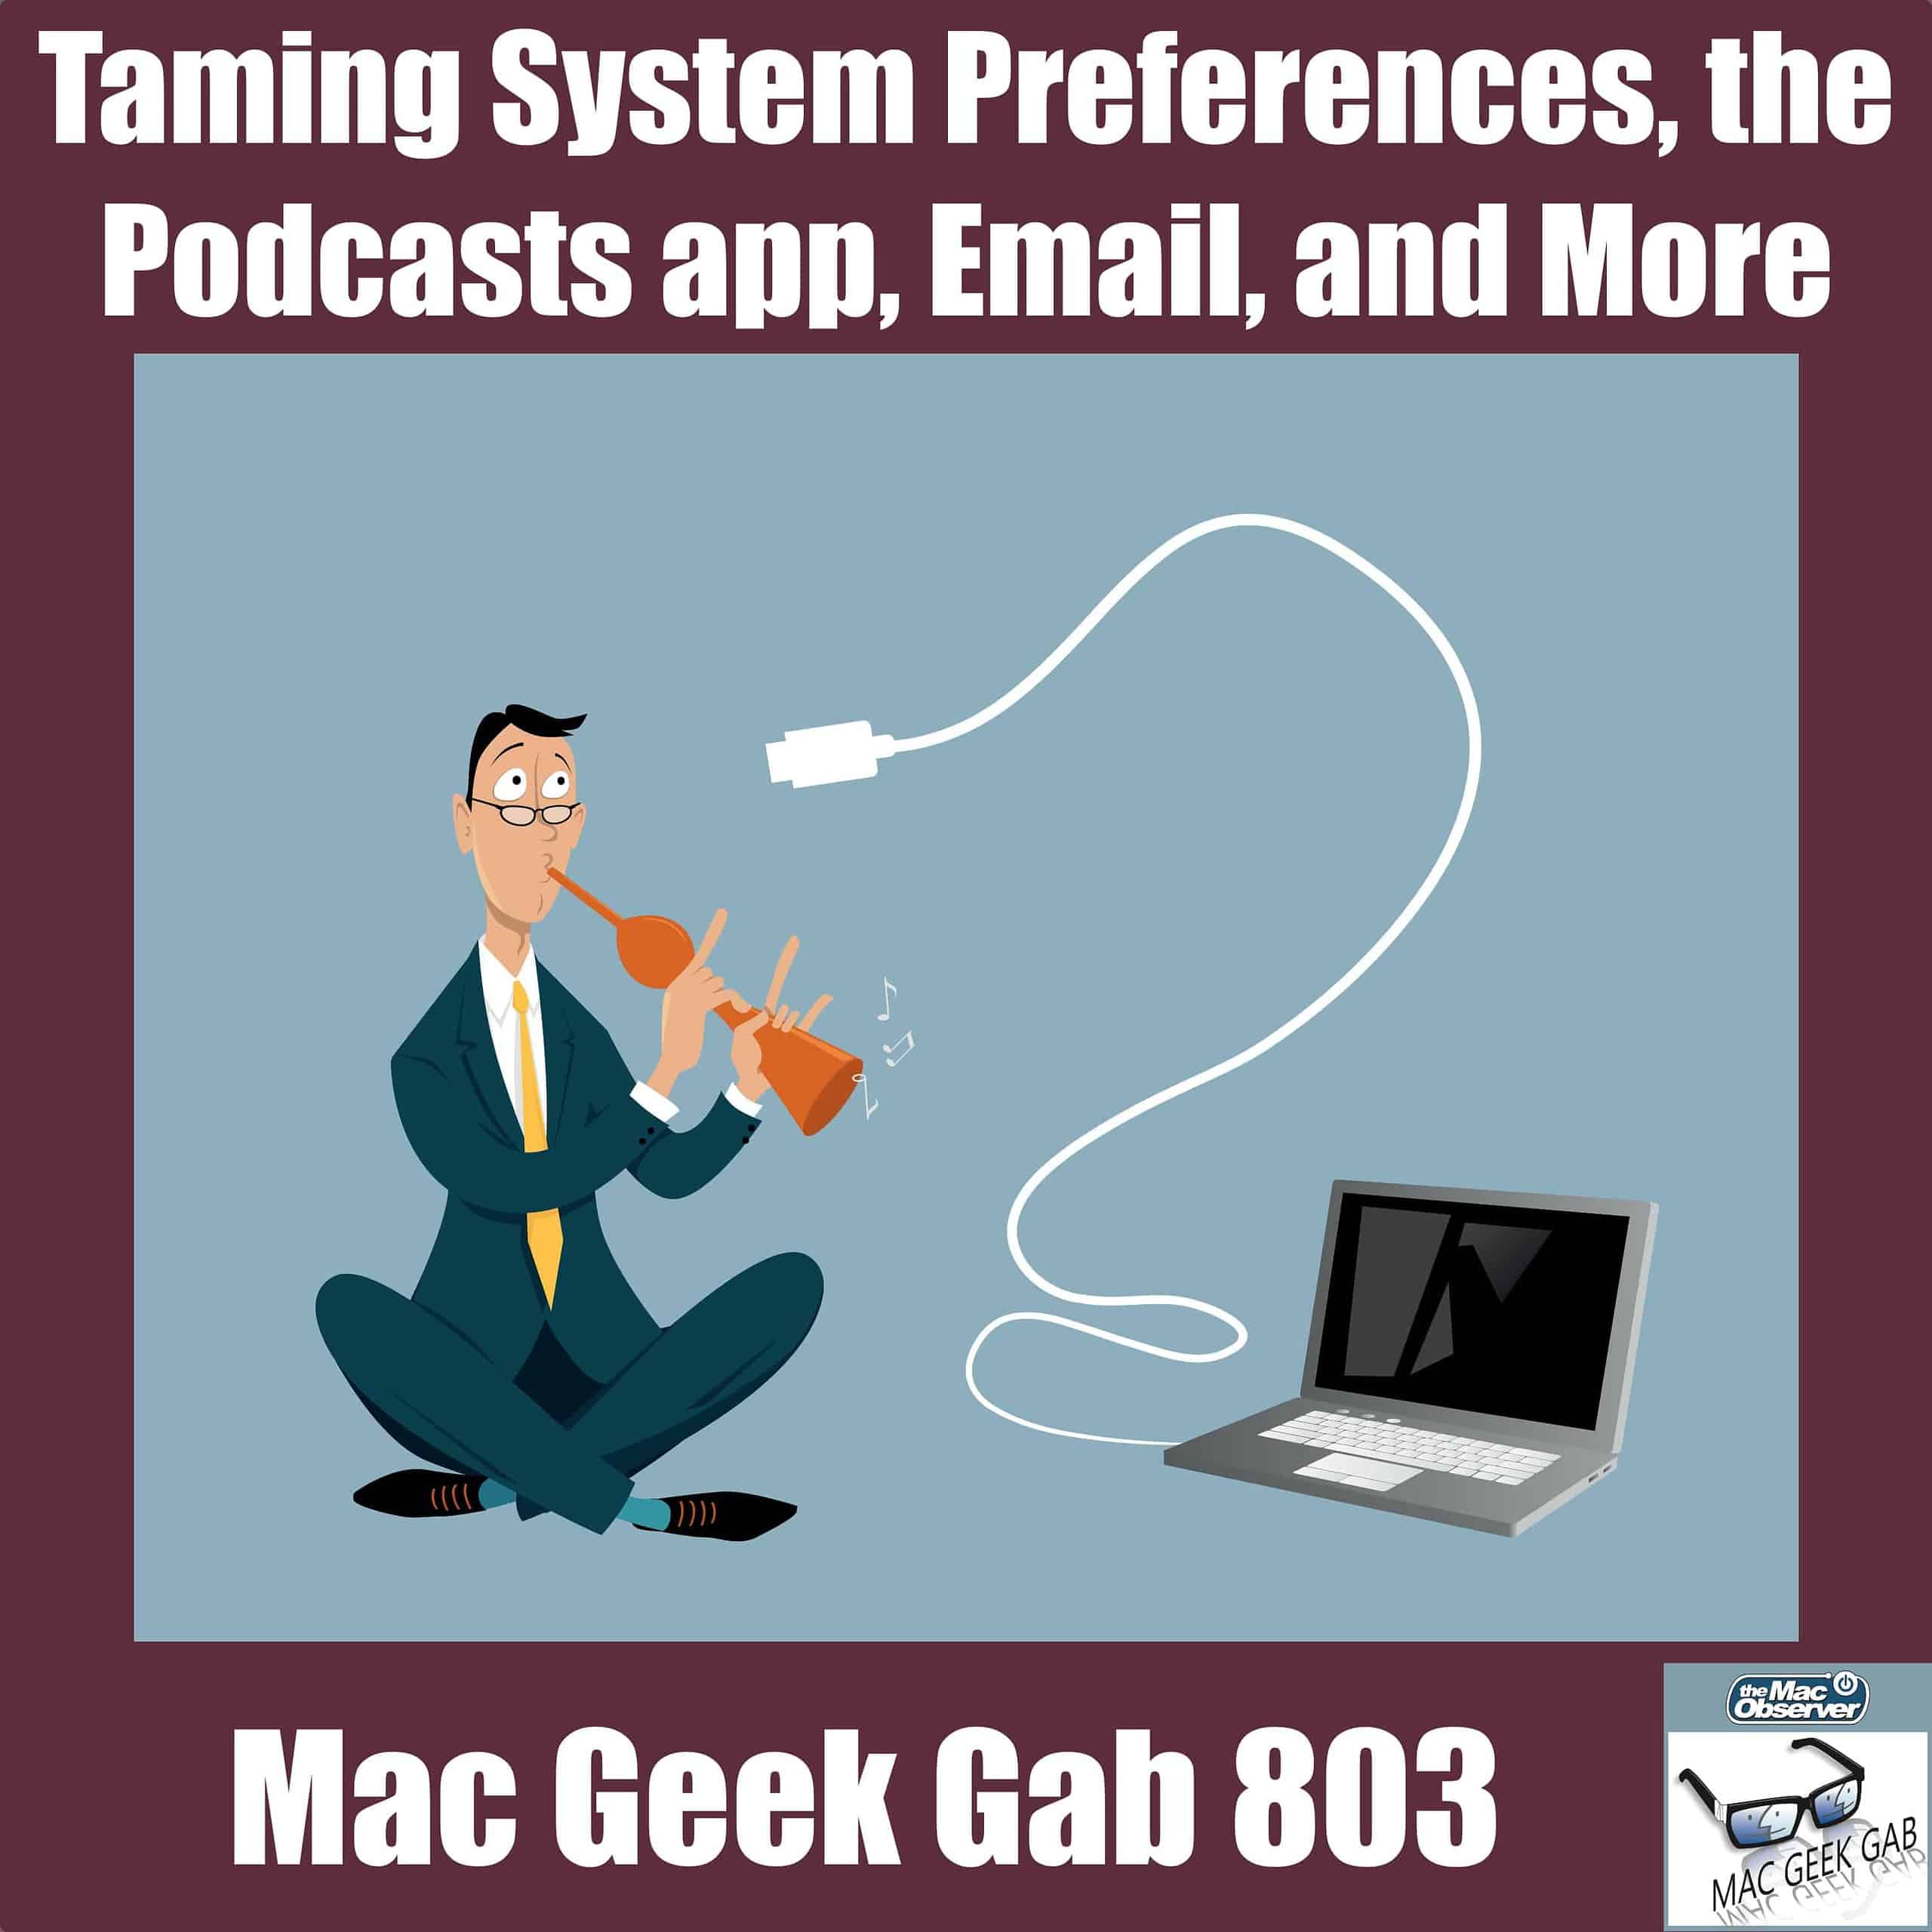 Taming System Preferences, Podcasts, Email, and More – Mac Geek Gab 803